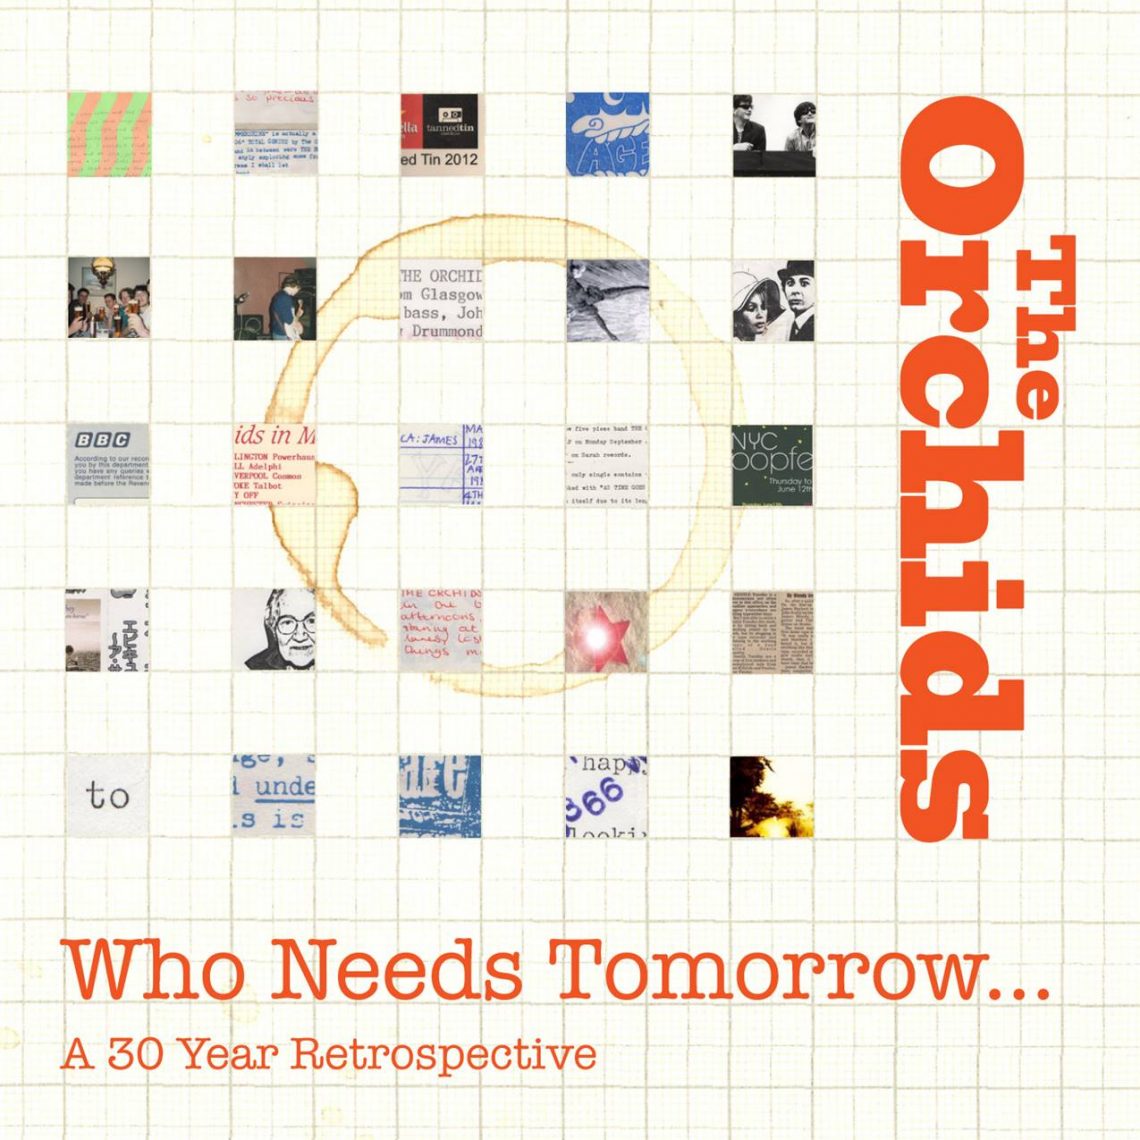 THE ORCHIDS – WHO NEEDS TOMORROW… A 30 YEAR RETROSPECTIVE